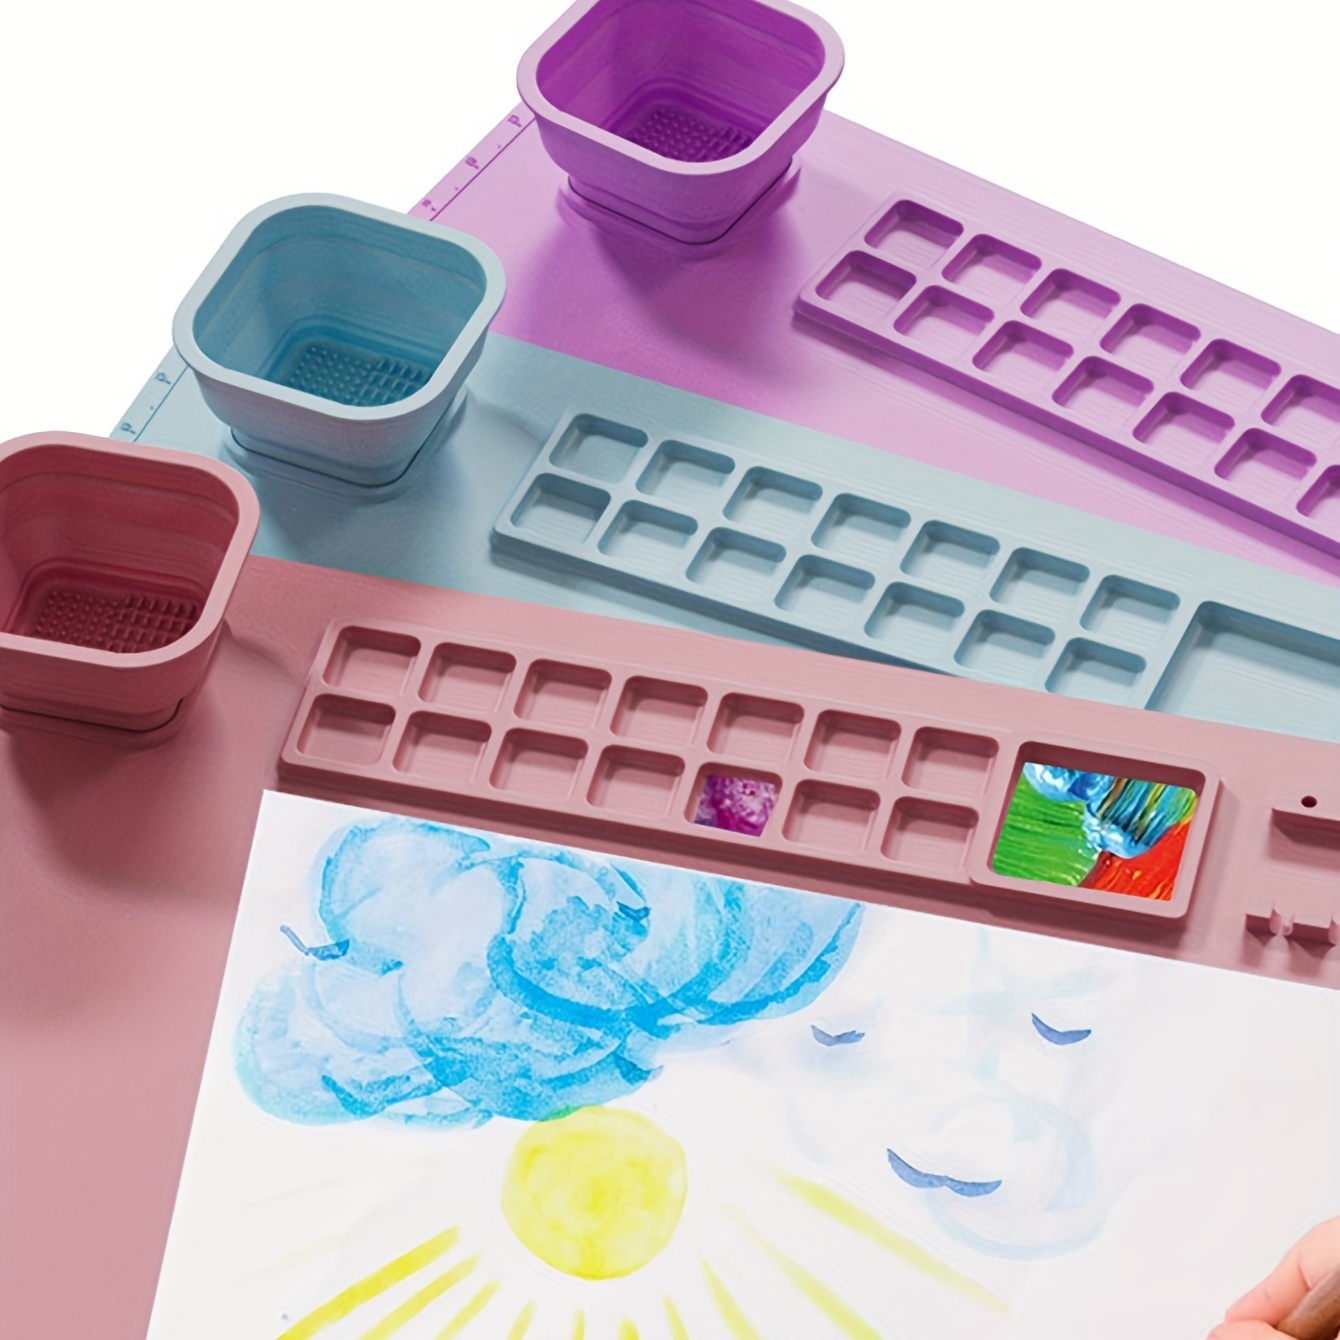  Silicone Painting Mat - 19.7X15.7 Silicone Art Mat with 1  Water Cup for Kids - Silcone Craft Mat has12 Color Dividers - 2 Paint  Dividers (White) : Arts, Crafts & Sewing